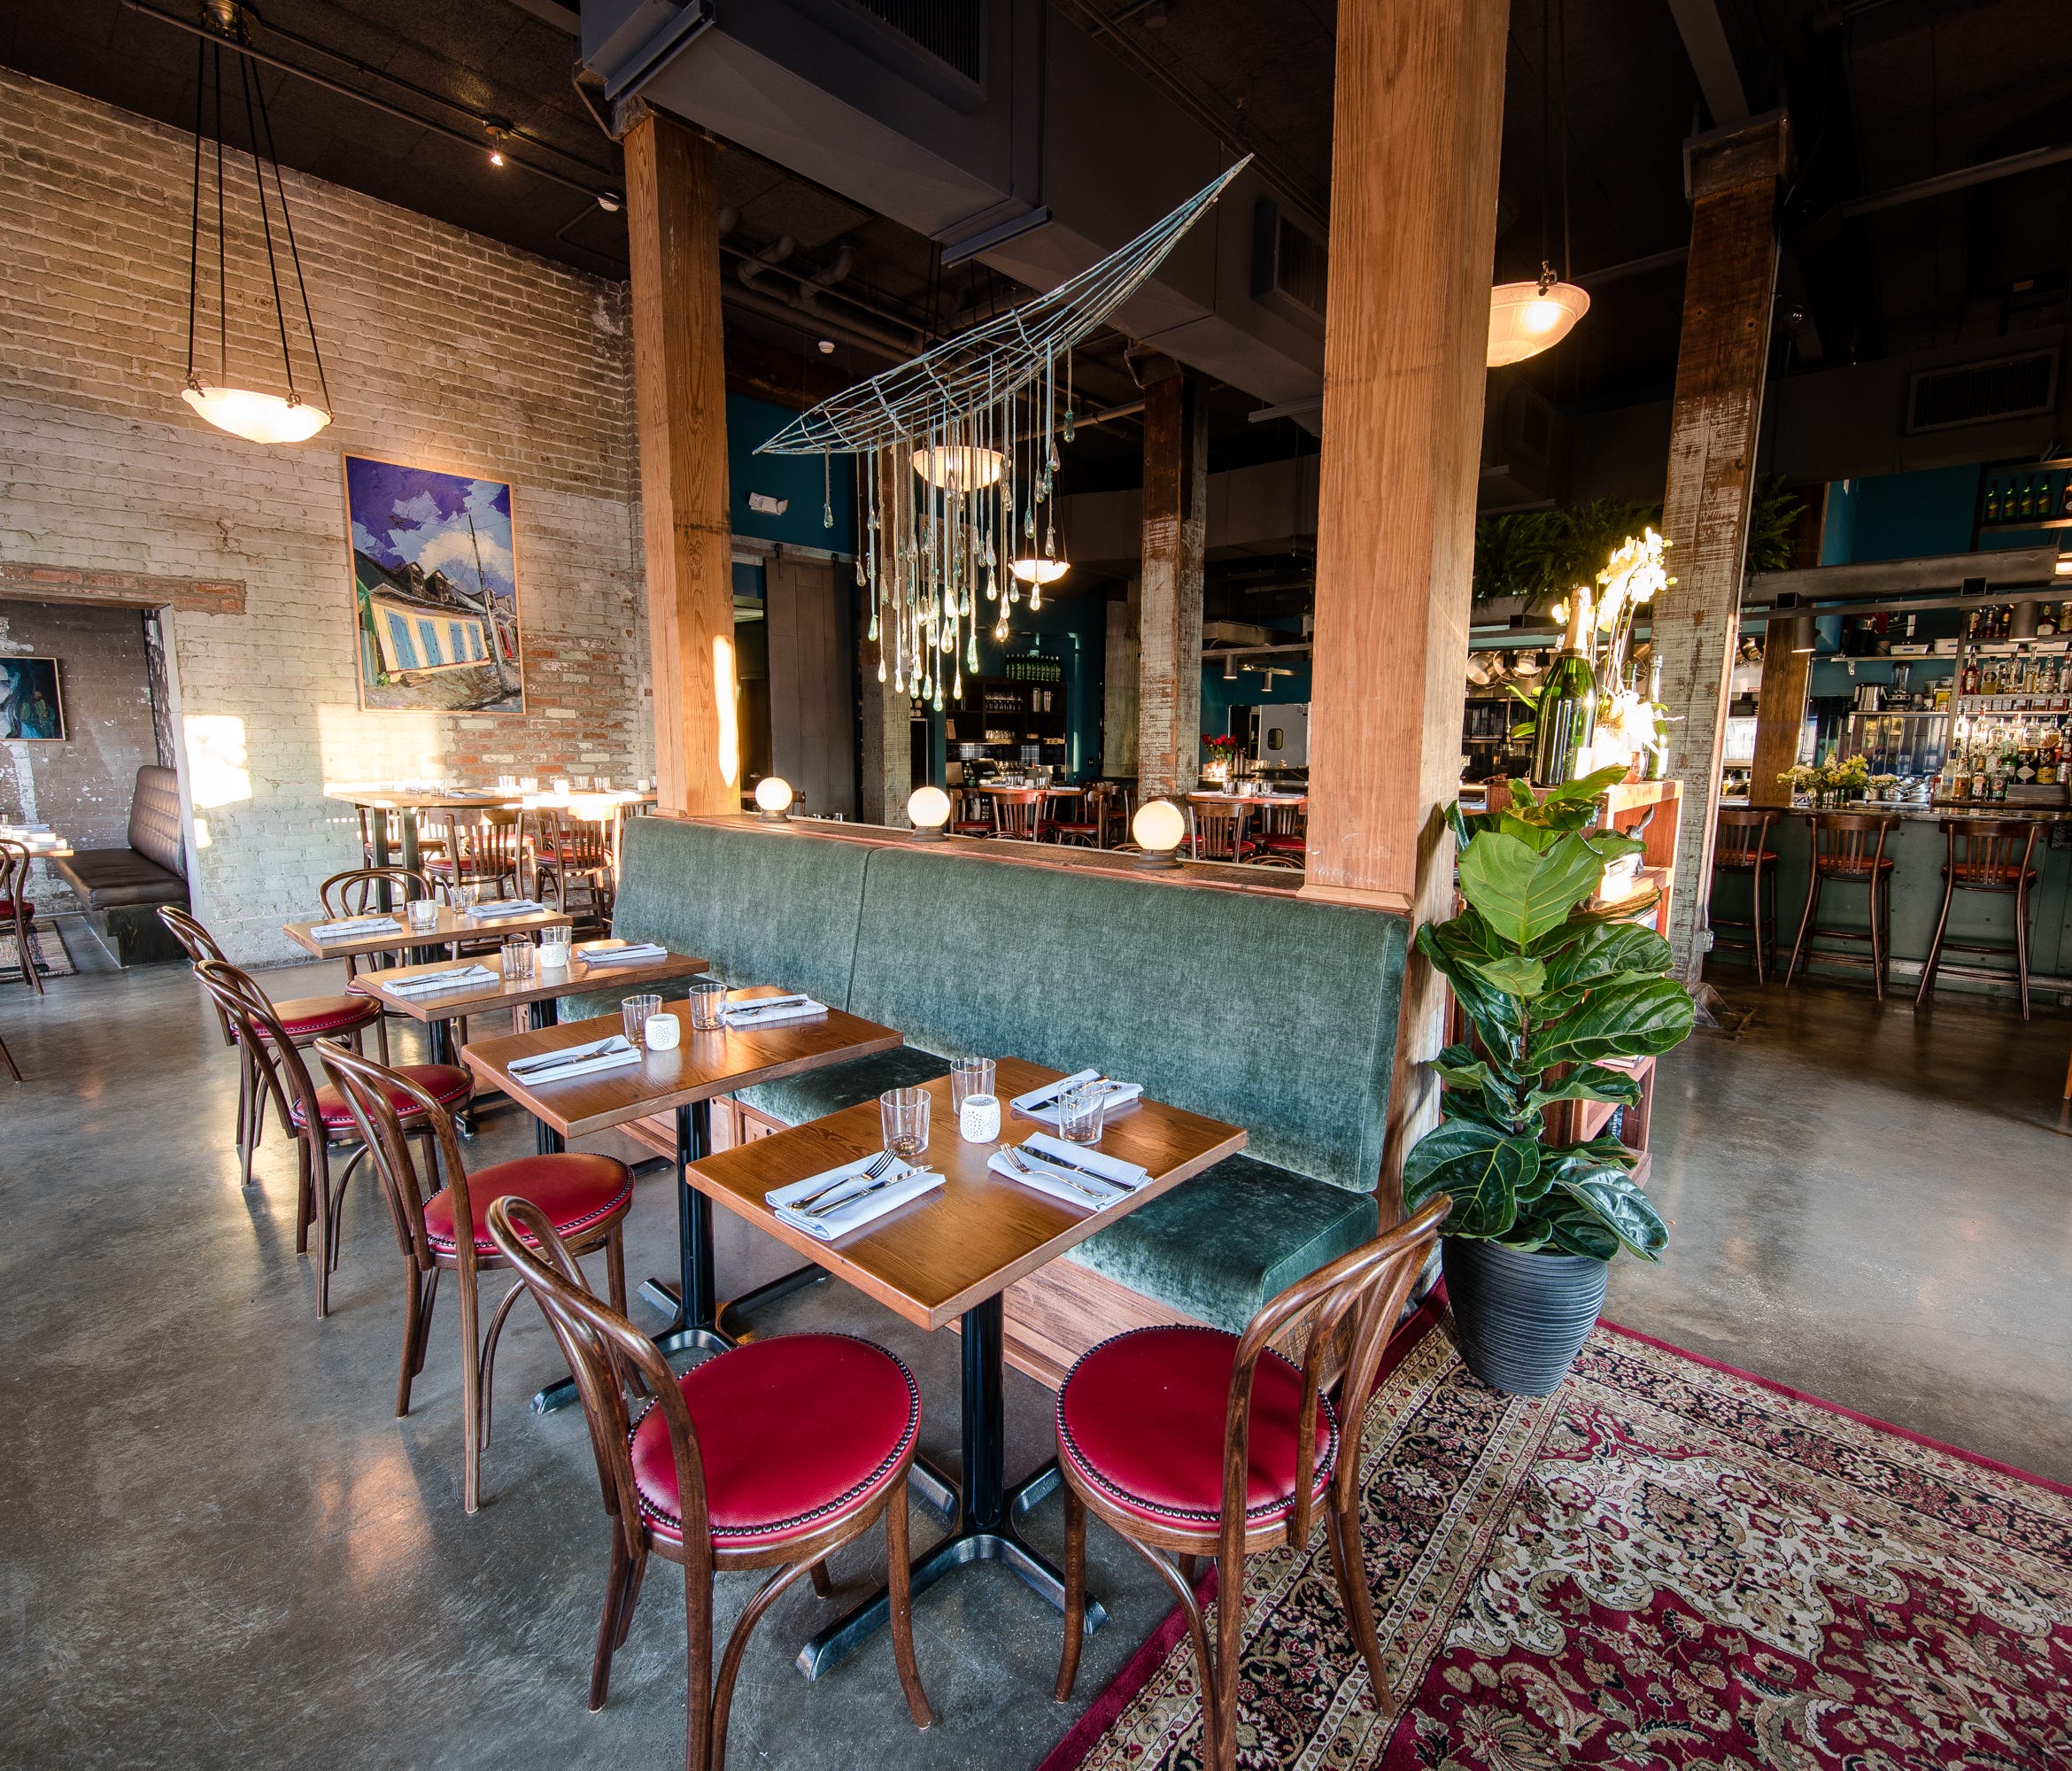 Bywater American Bistro opened in in the Rice Mill Lofts in New Orleans' Bywater neighborhood on March 15.